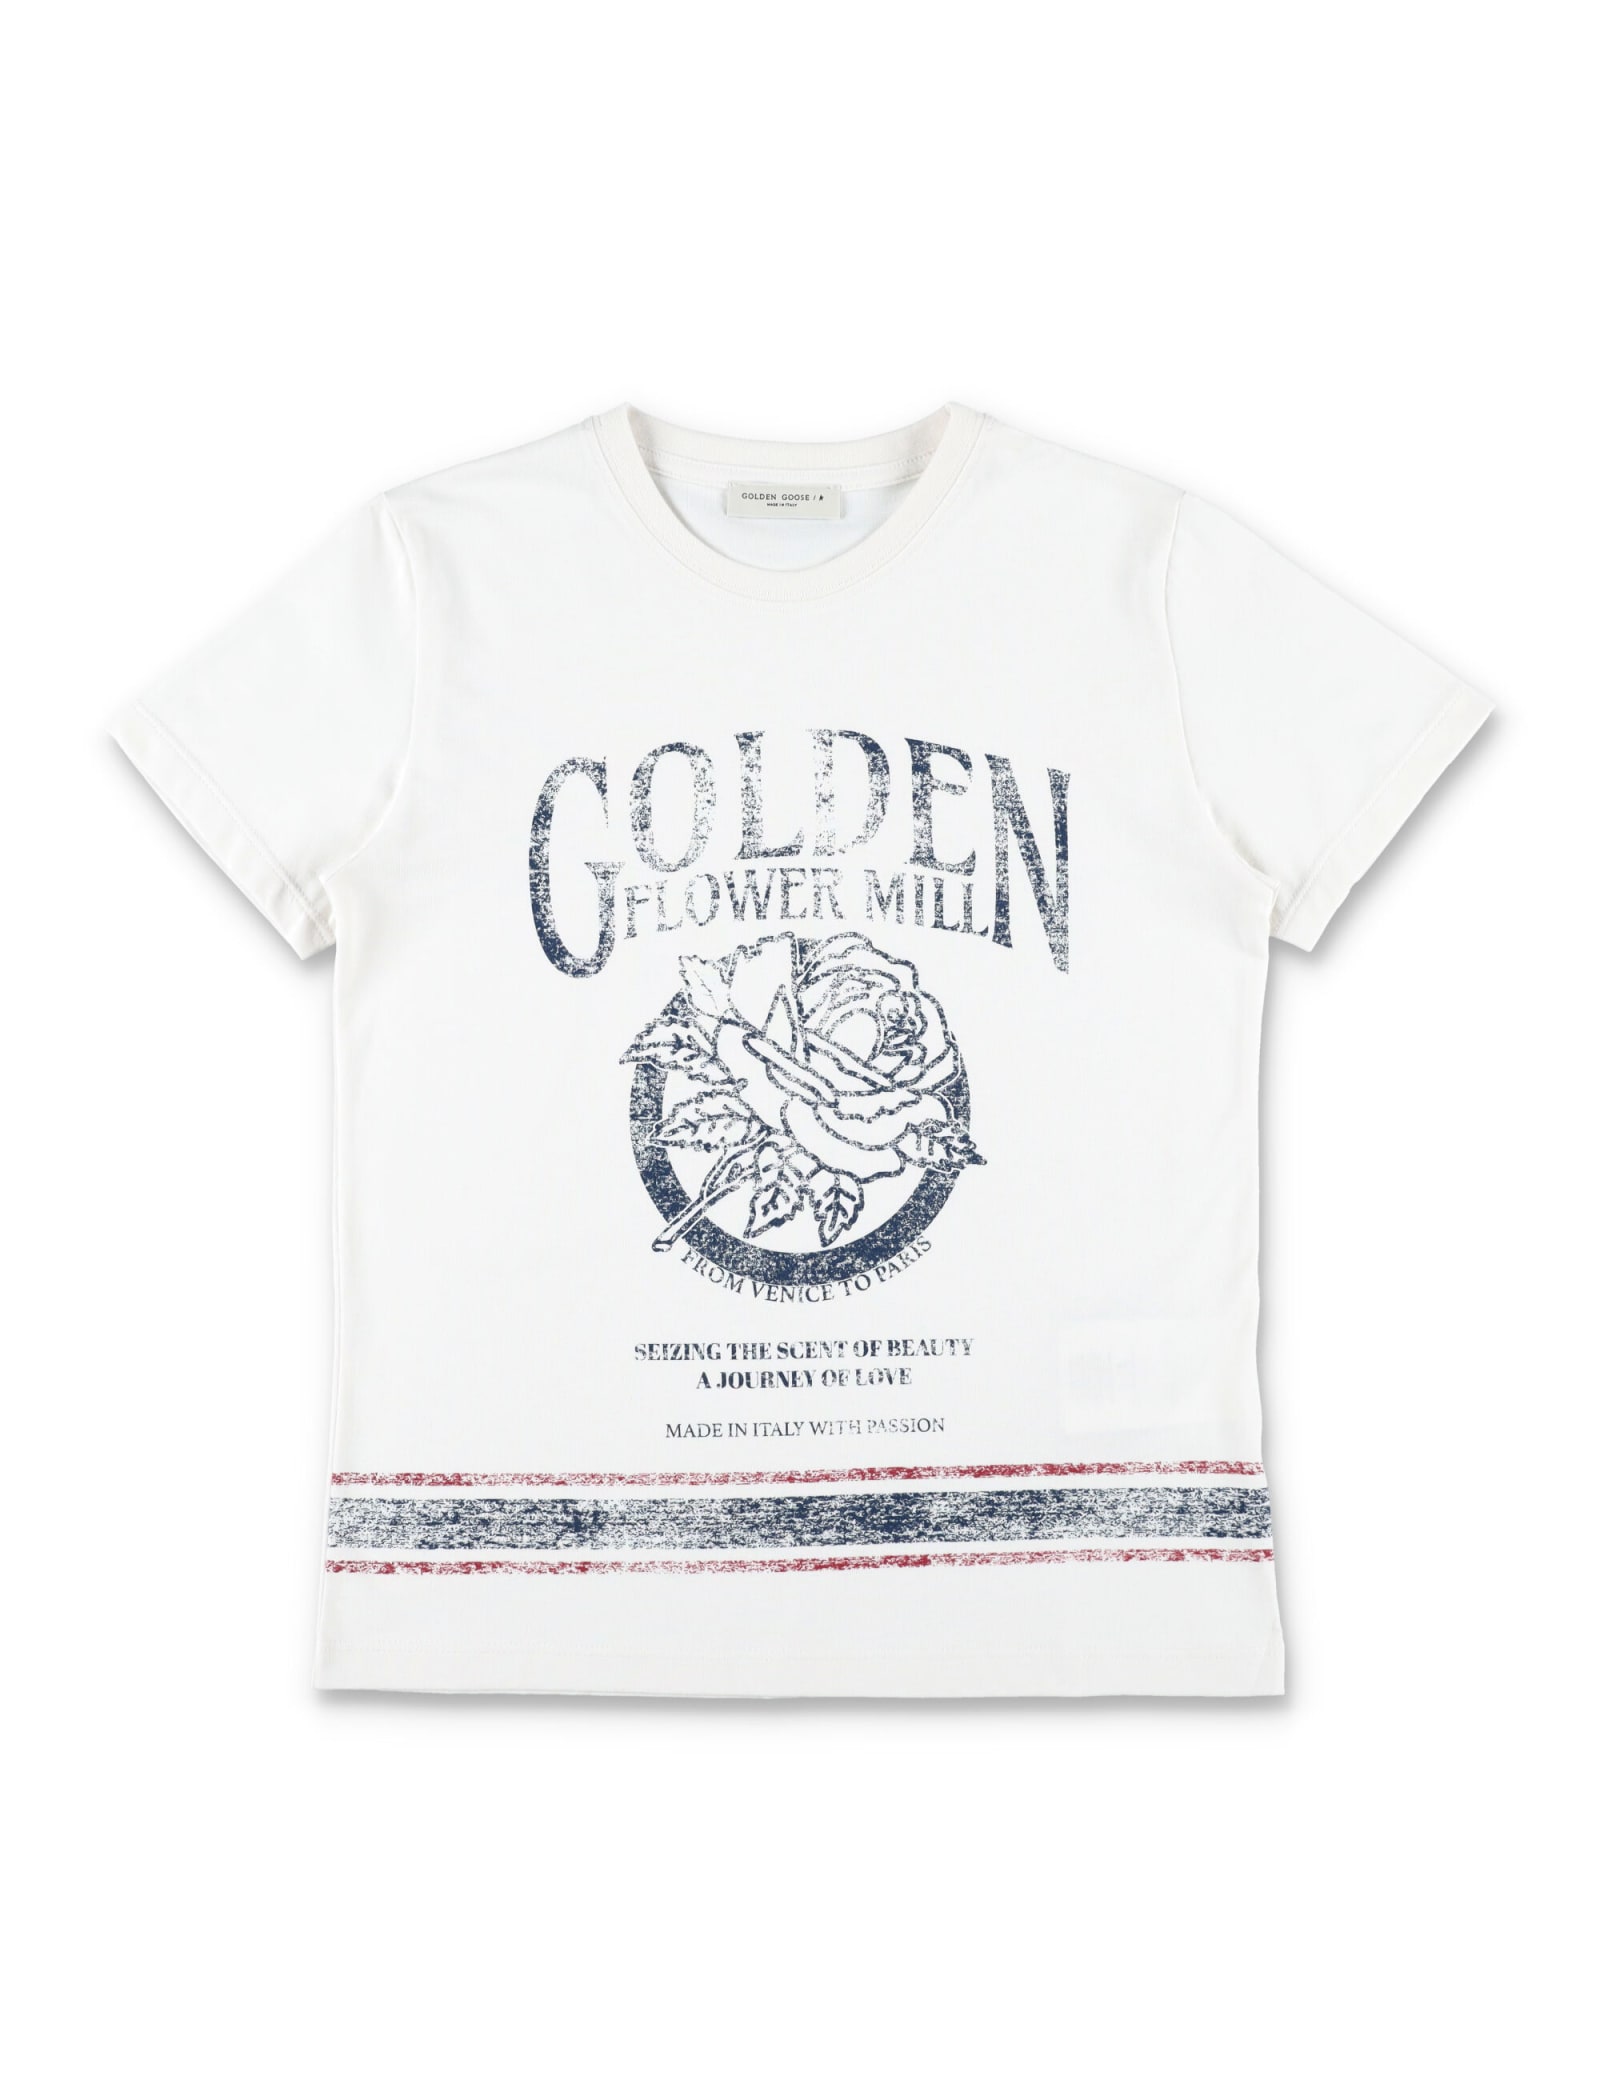 Golden Goose Kids' Printed T-shirt In Artic Wolf